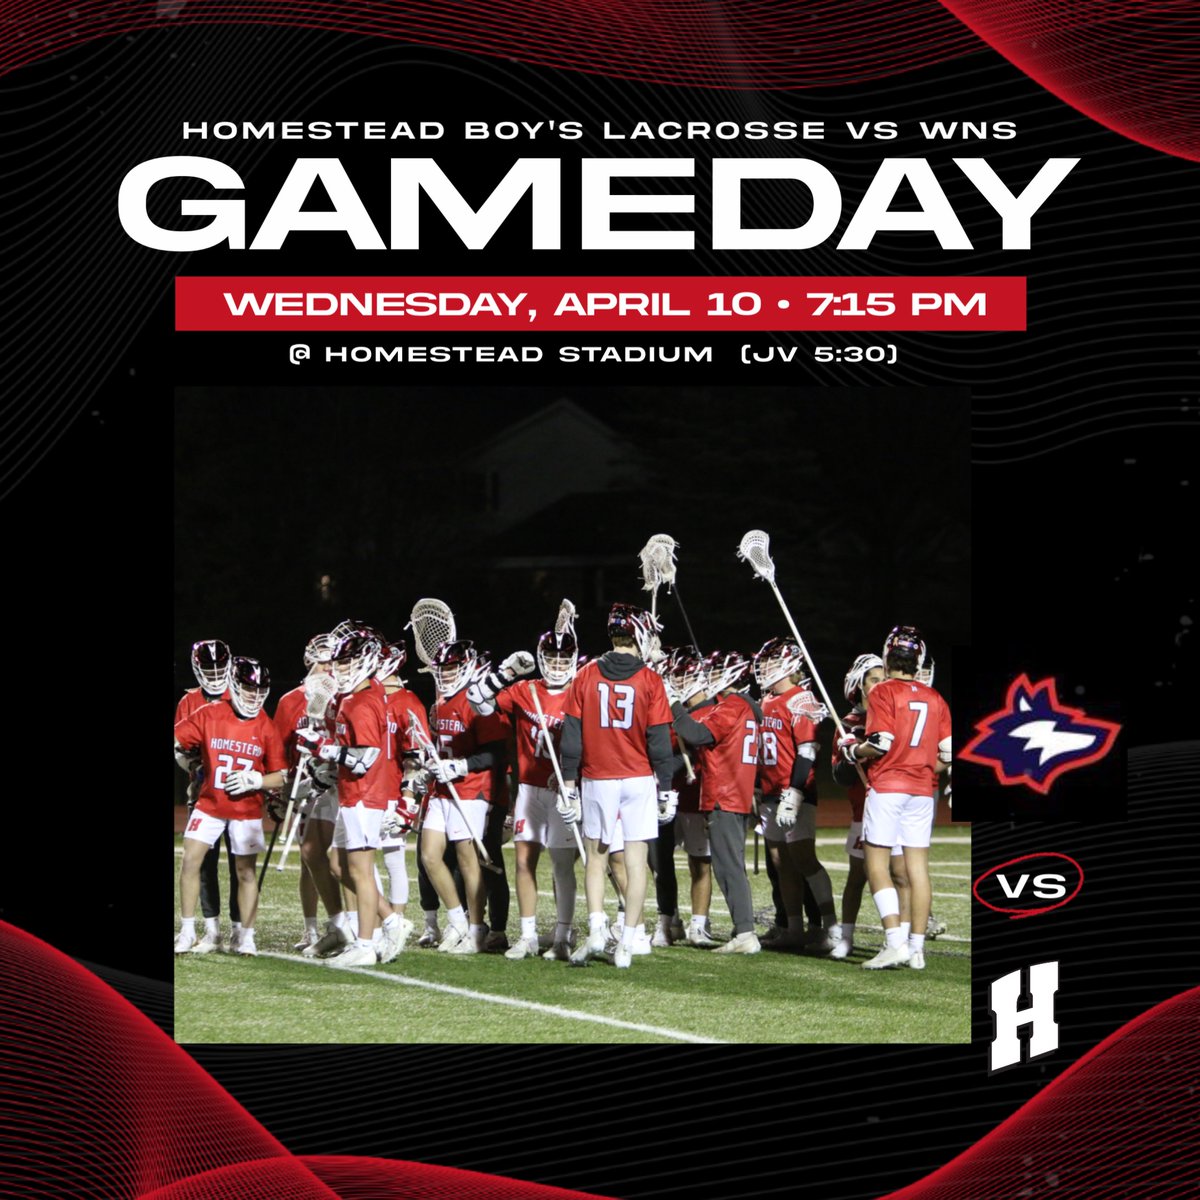 Boy's lacrosse takes on WNS in first ever North Shore Conference game as a WIAA sport! 📍: Homestead High School Stadium ⏰: JV 5:30p | Varsity 7:15p #conferenceclash #gohighlanders